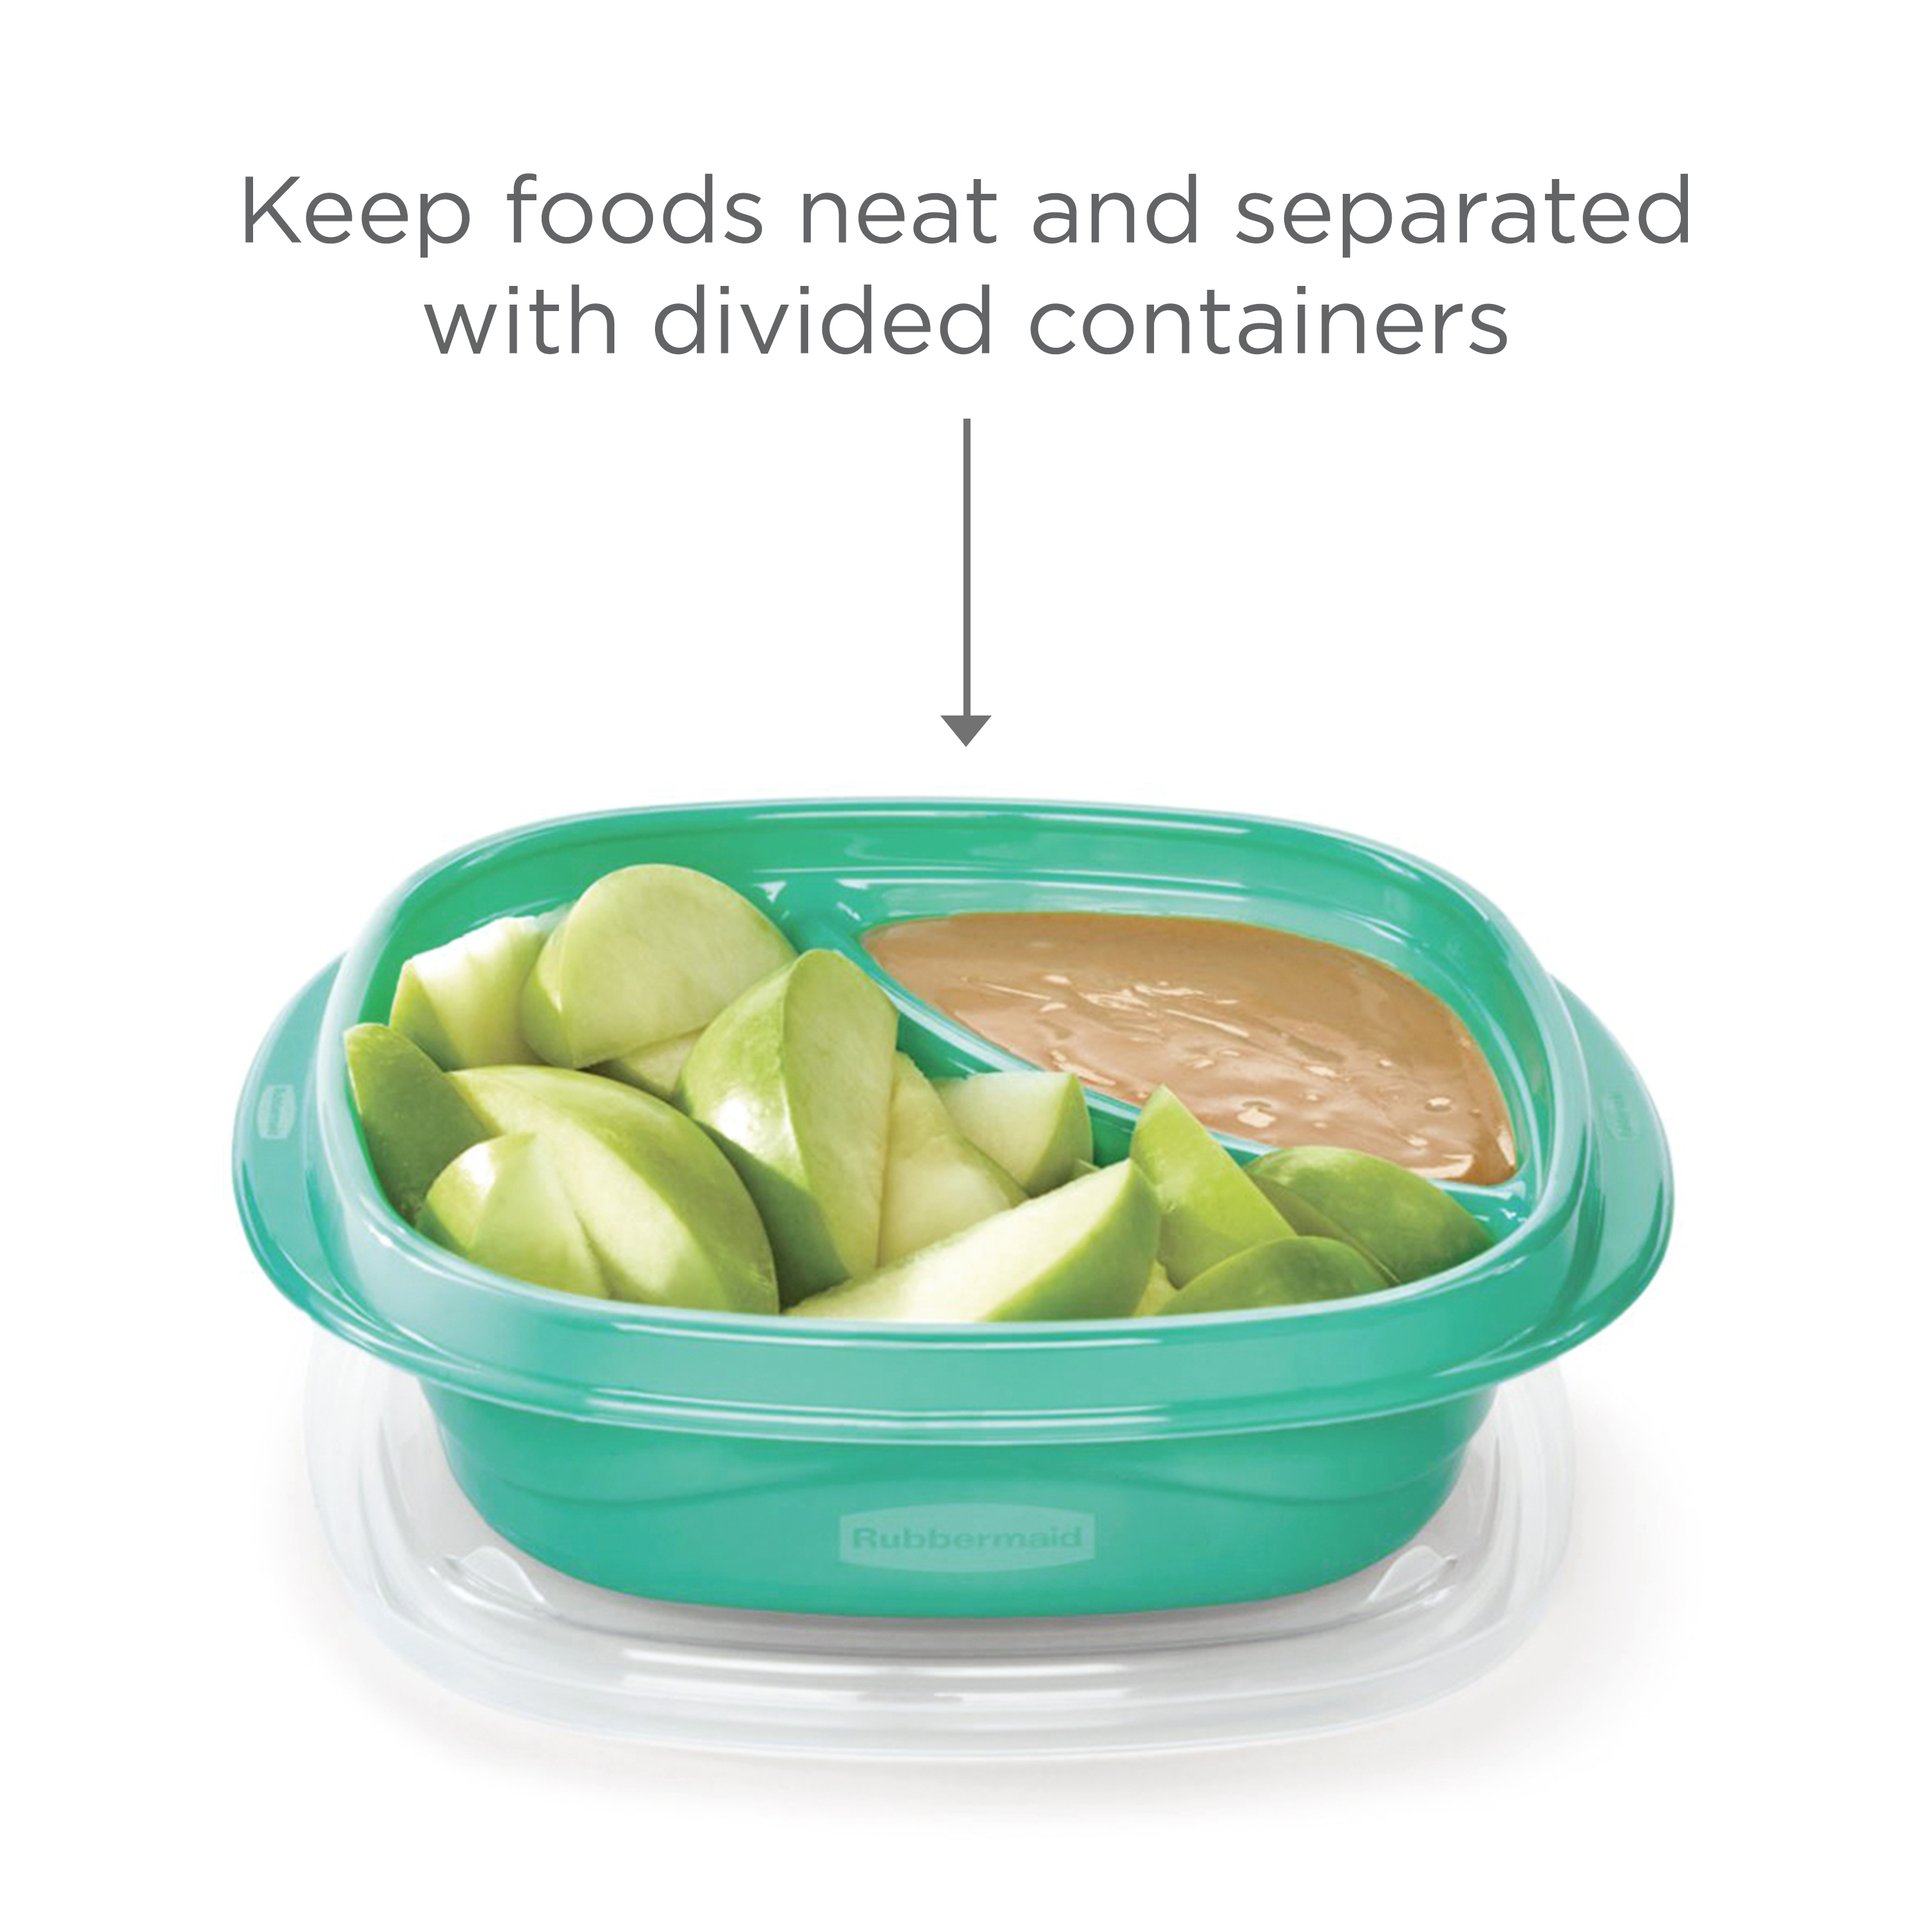 Rubbermaid TakeAlongs Variety Set of 25 Food Storage Containers, Teal Lids - image 4 of 6